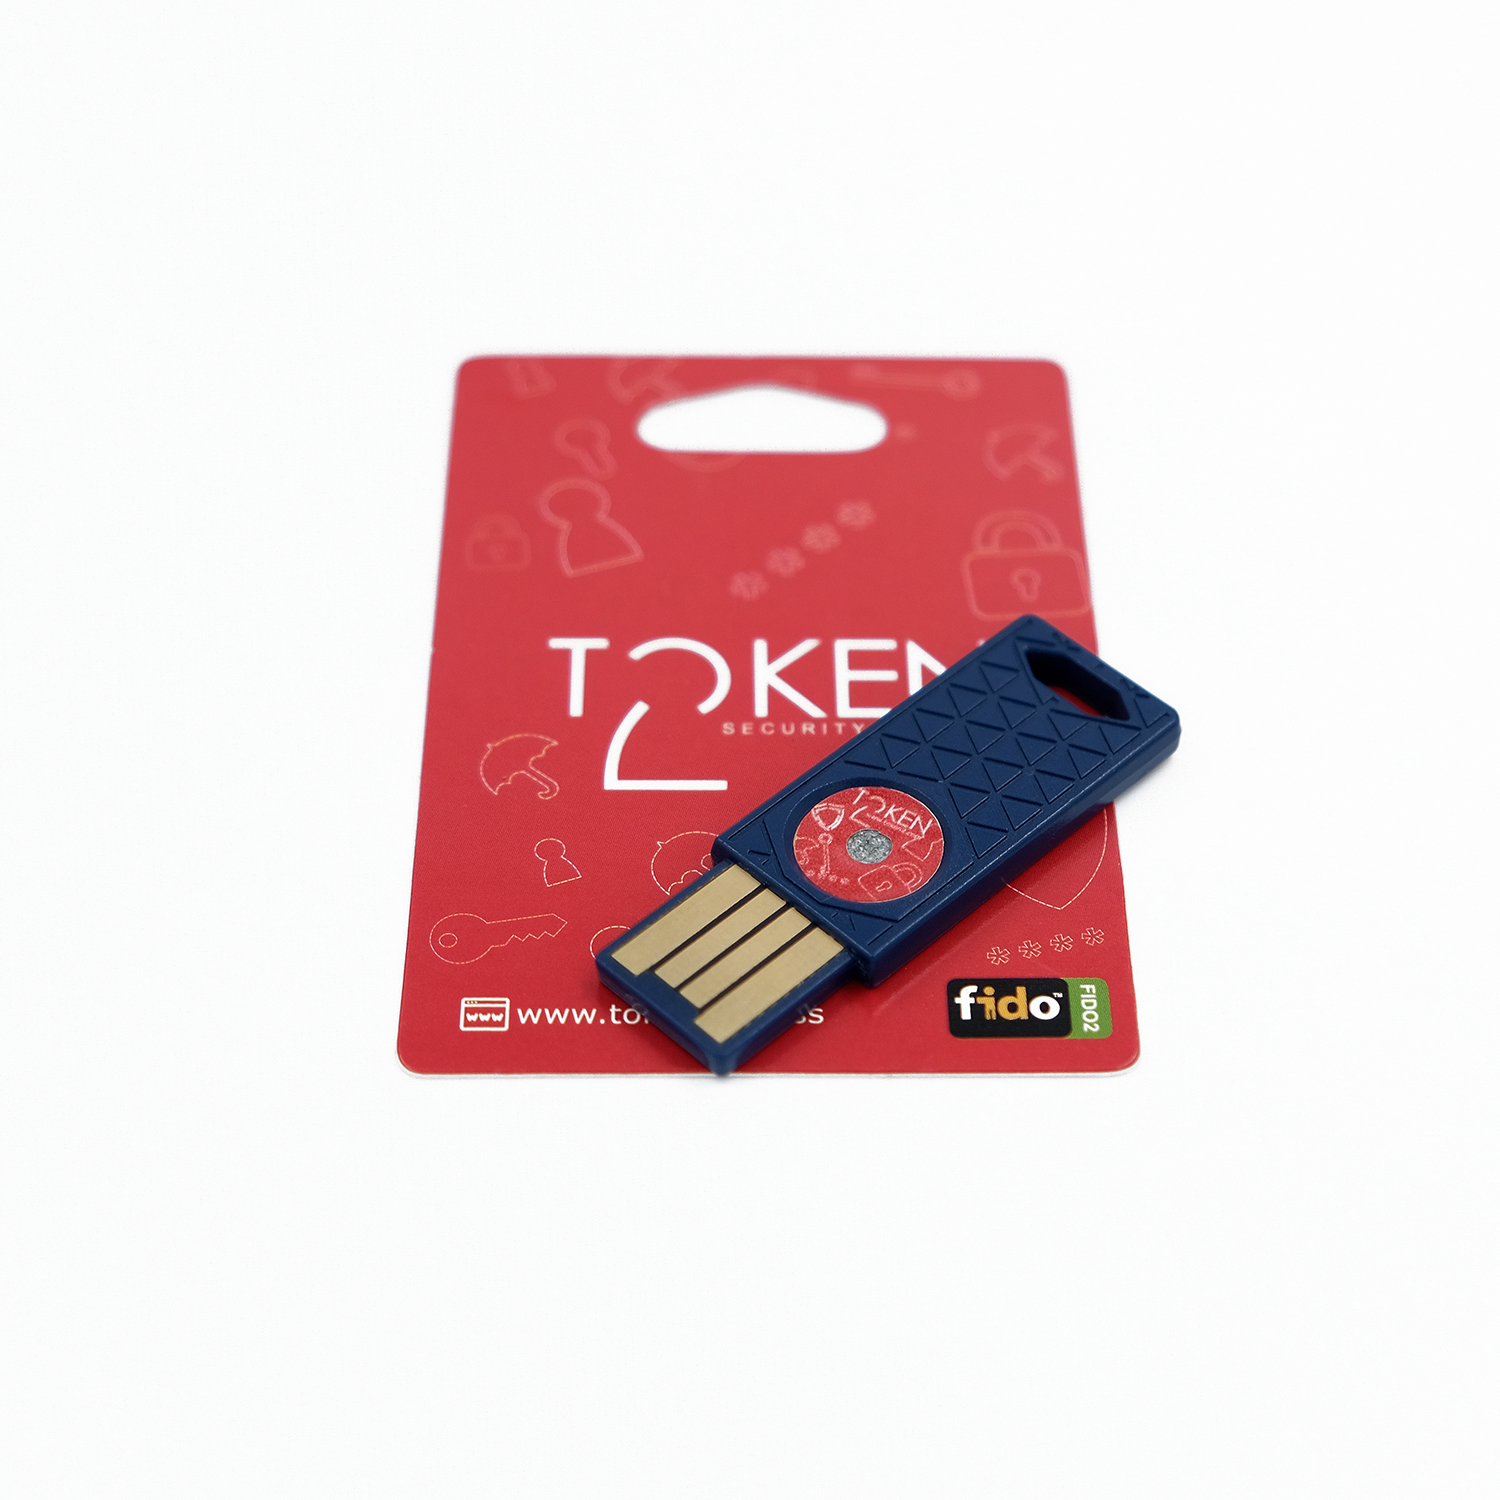 Token2, FIDO2 – An Open Authentication Standard, Programmable tokens, TOKEN2 MFA Products and Services, programmable hardware token, FIDO2 key,  U2F key, TOTP, FIDO2 – An Open Authentication Standard